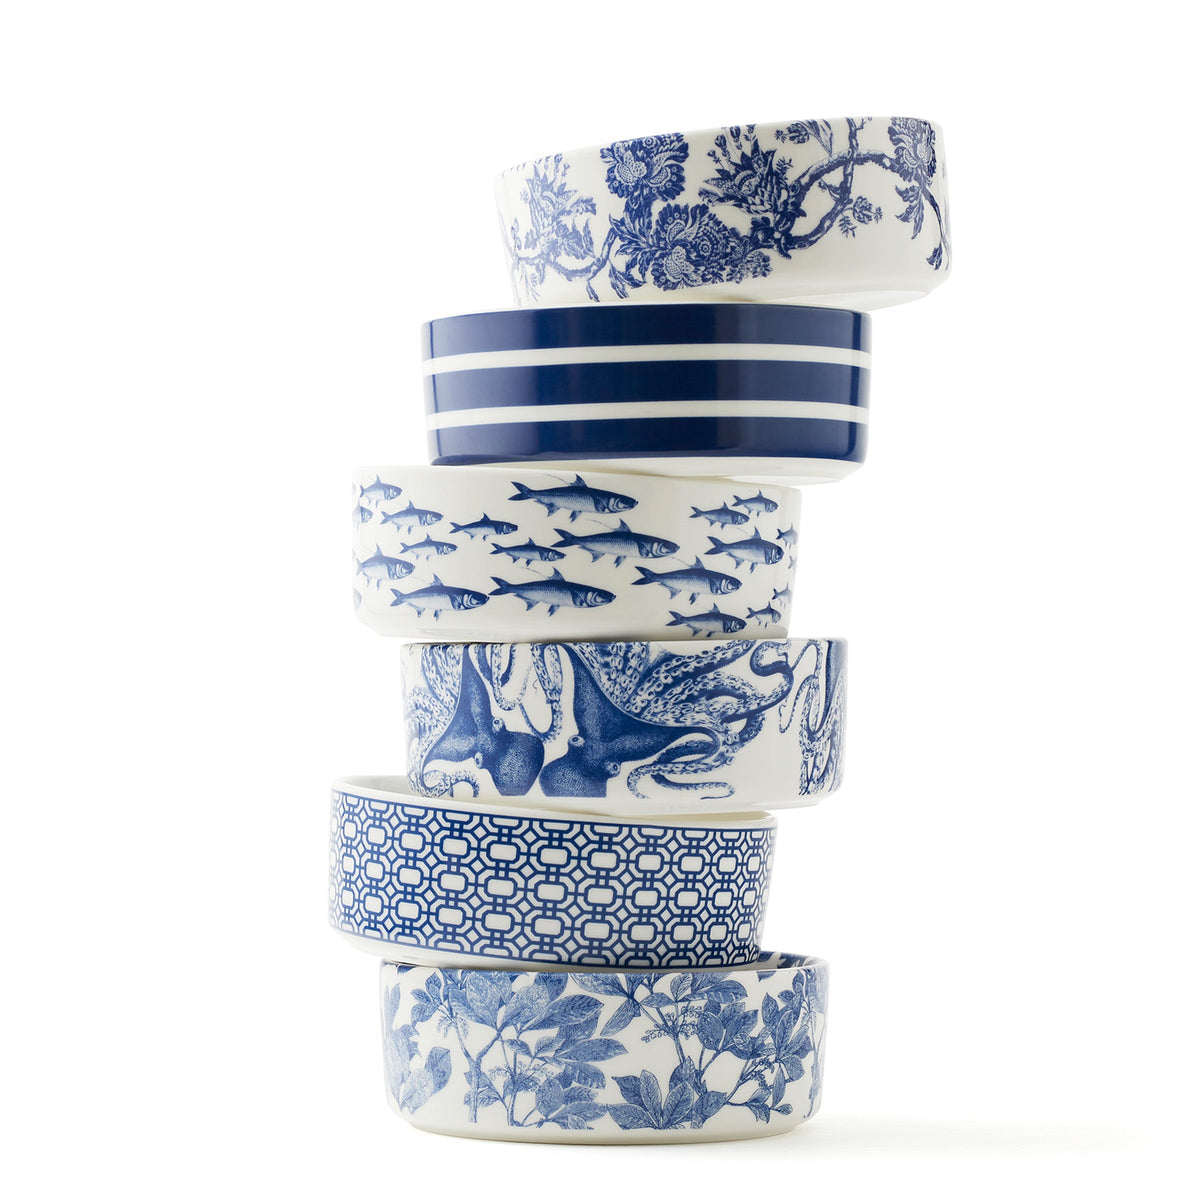 Six patterns of blue and white porcelain large pet bowls are available at Caskata in various botanical and sealife patterns.